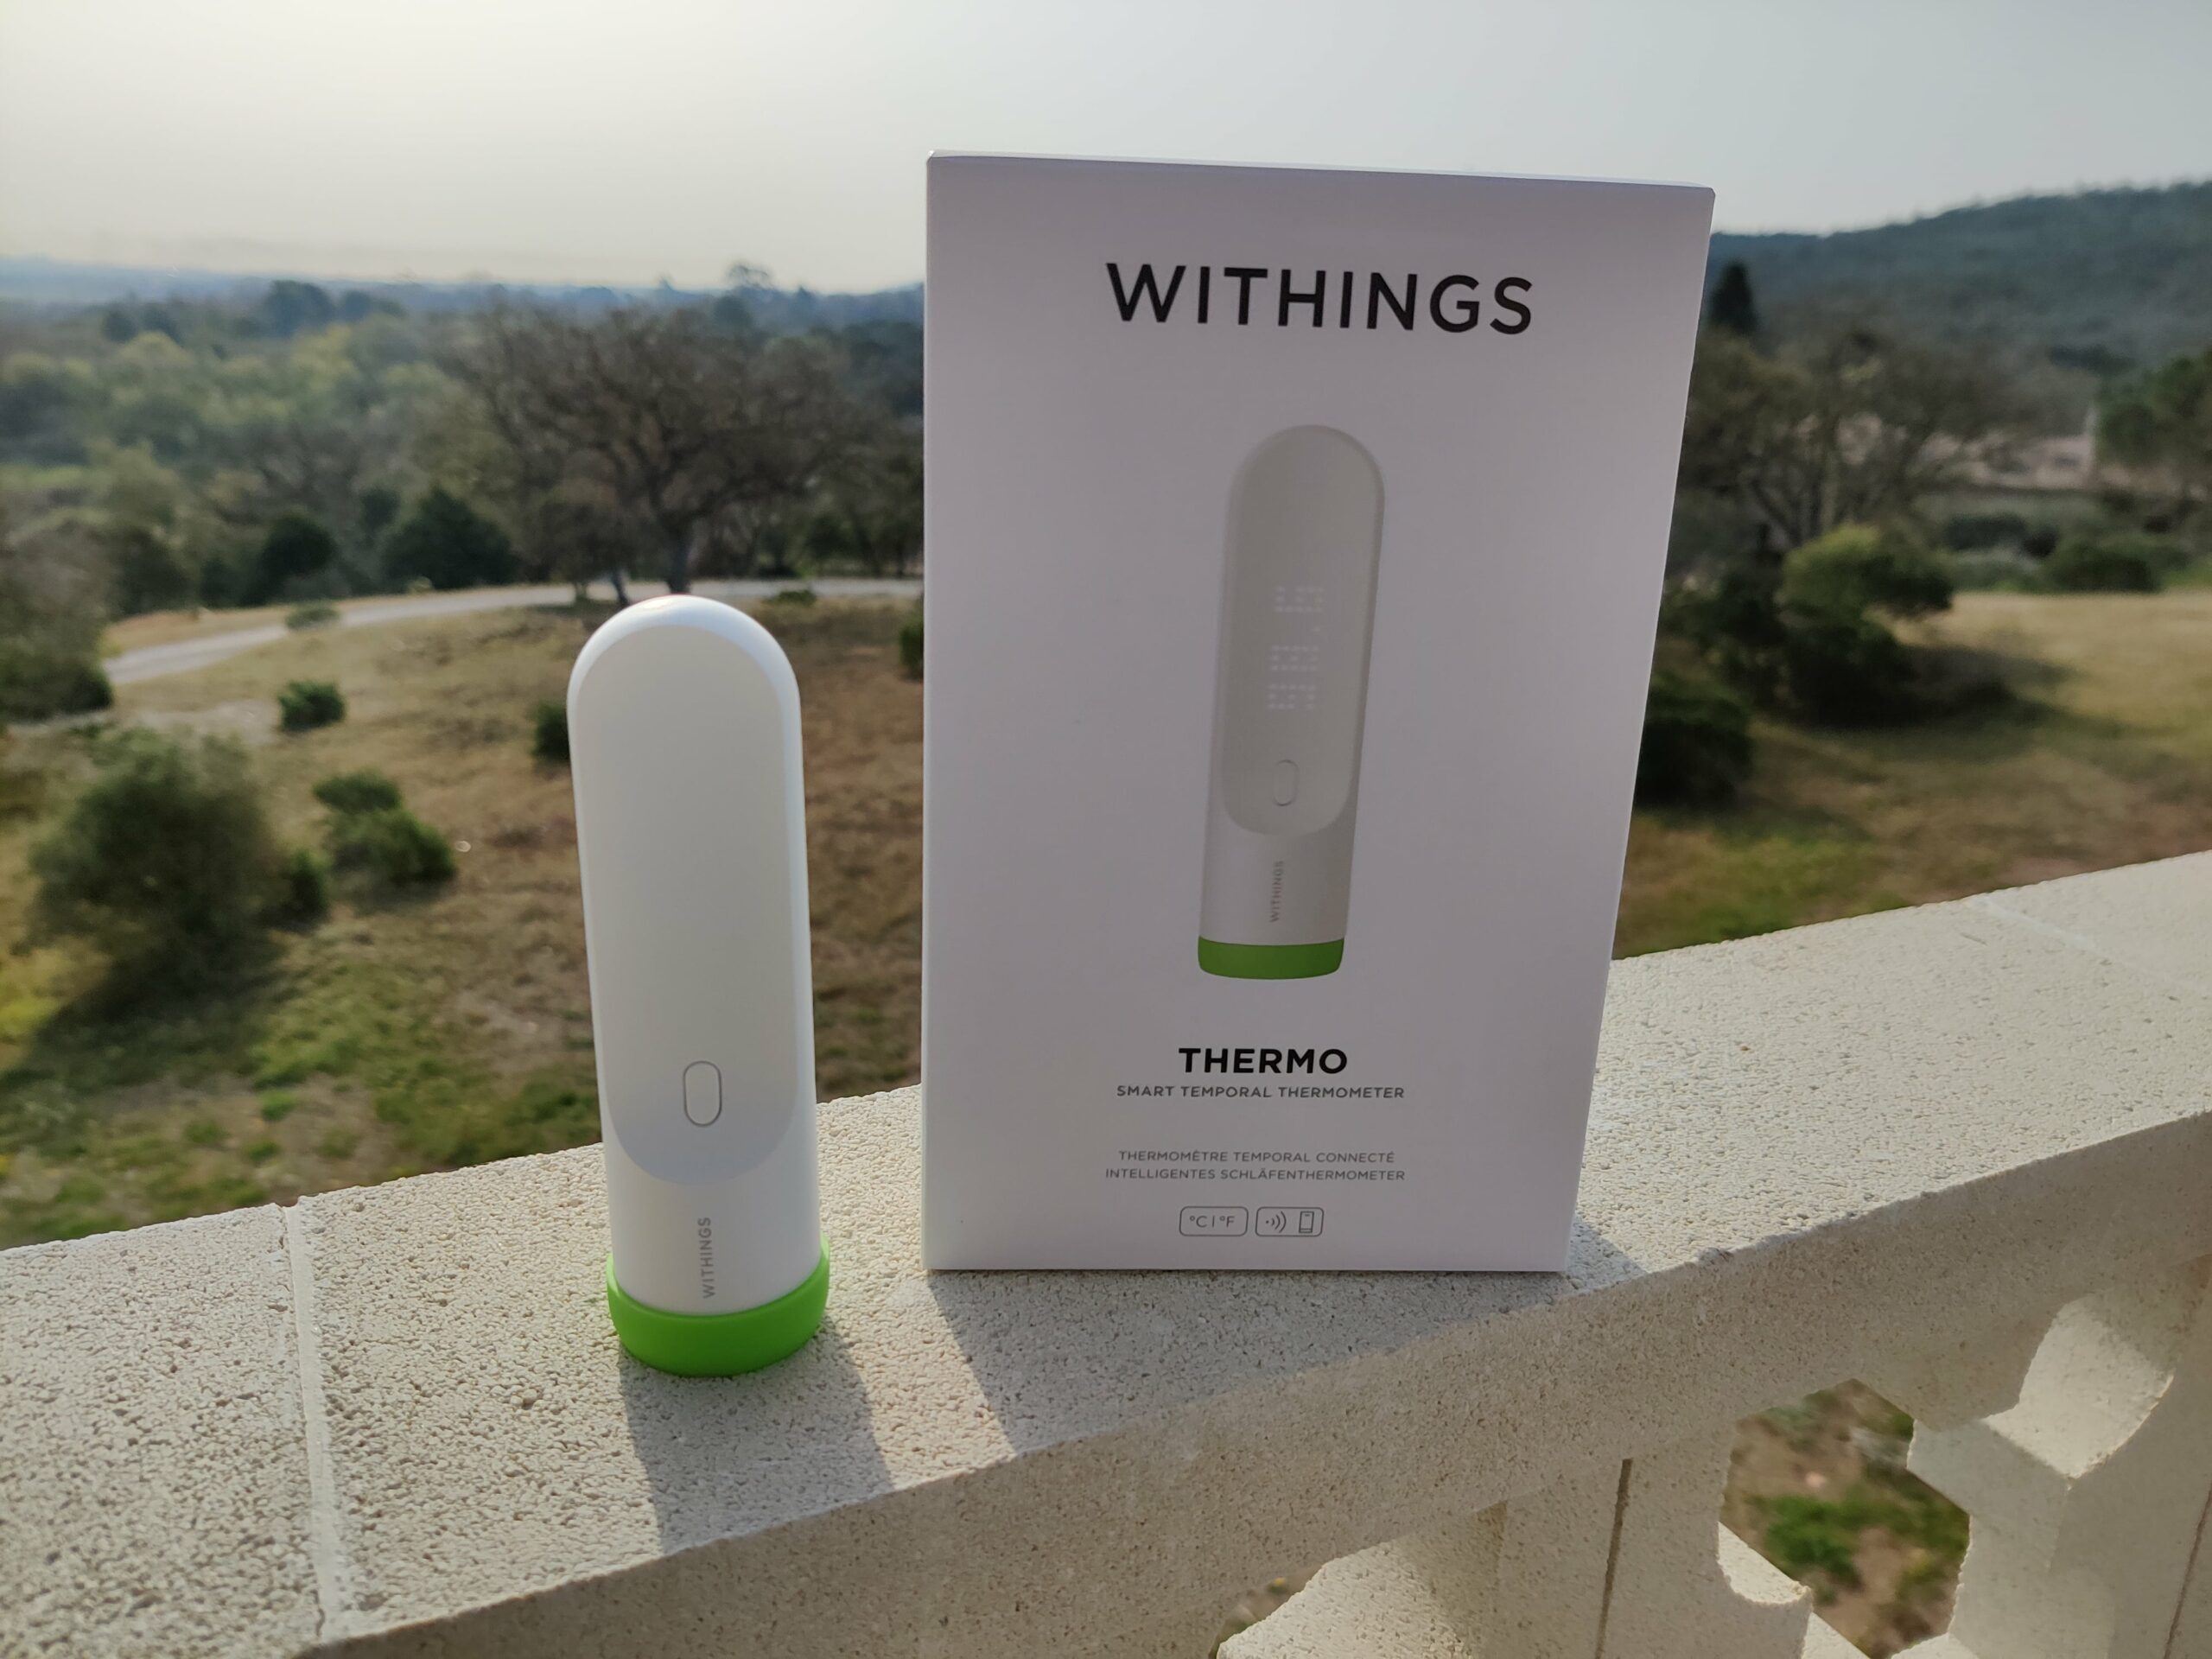 Thermo Withings couverture